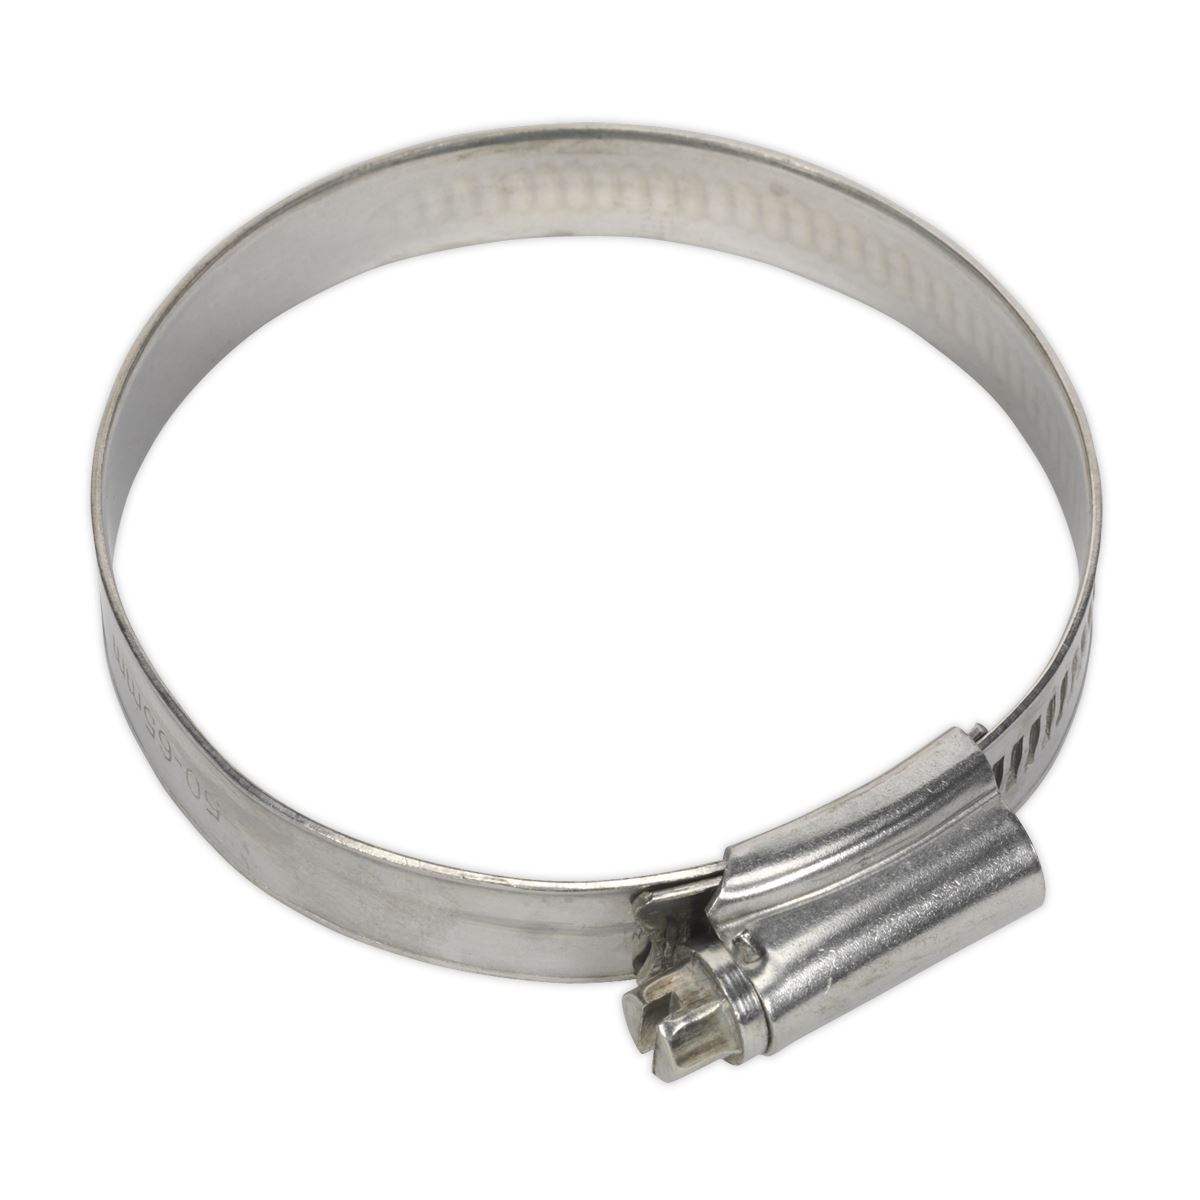 Sealey Hose Clip Stainless Steel Ø55-64mm Pack of 10